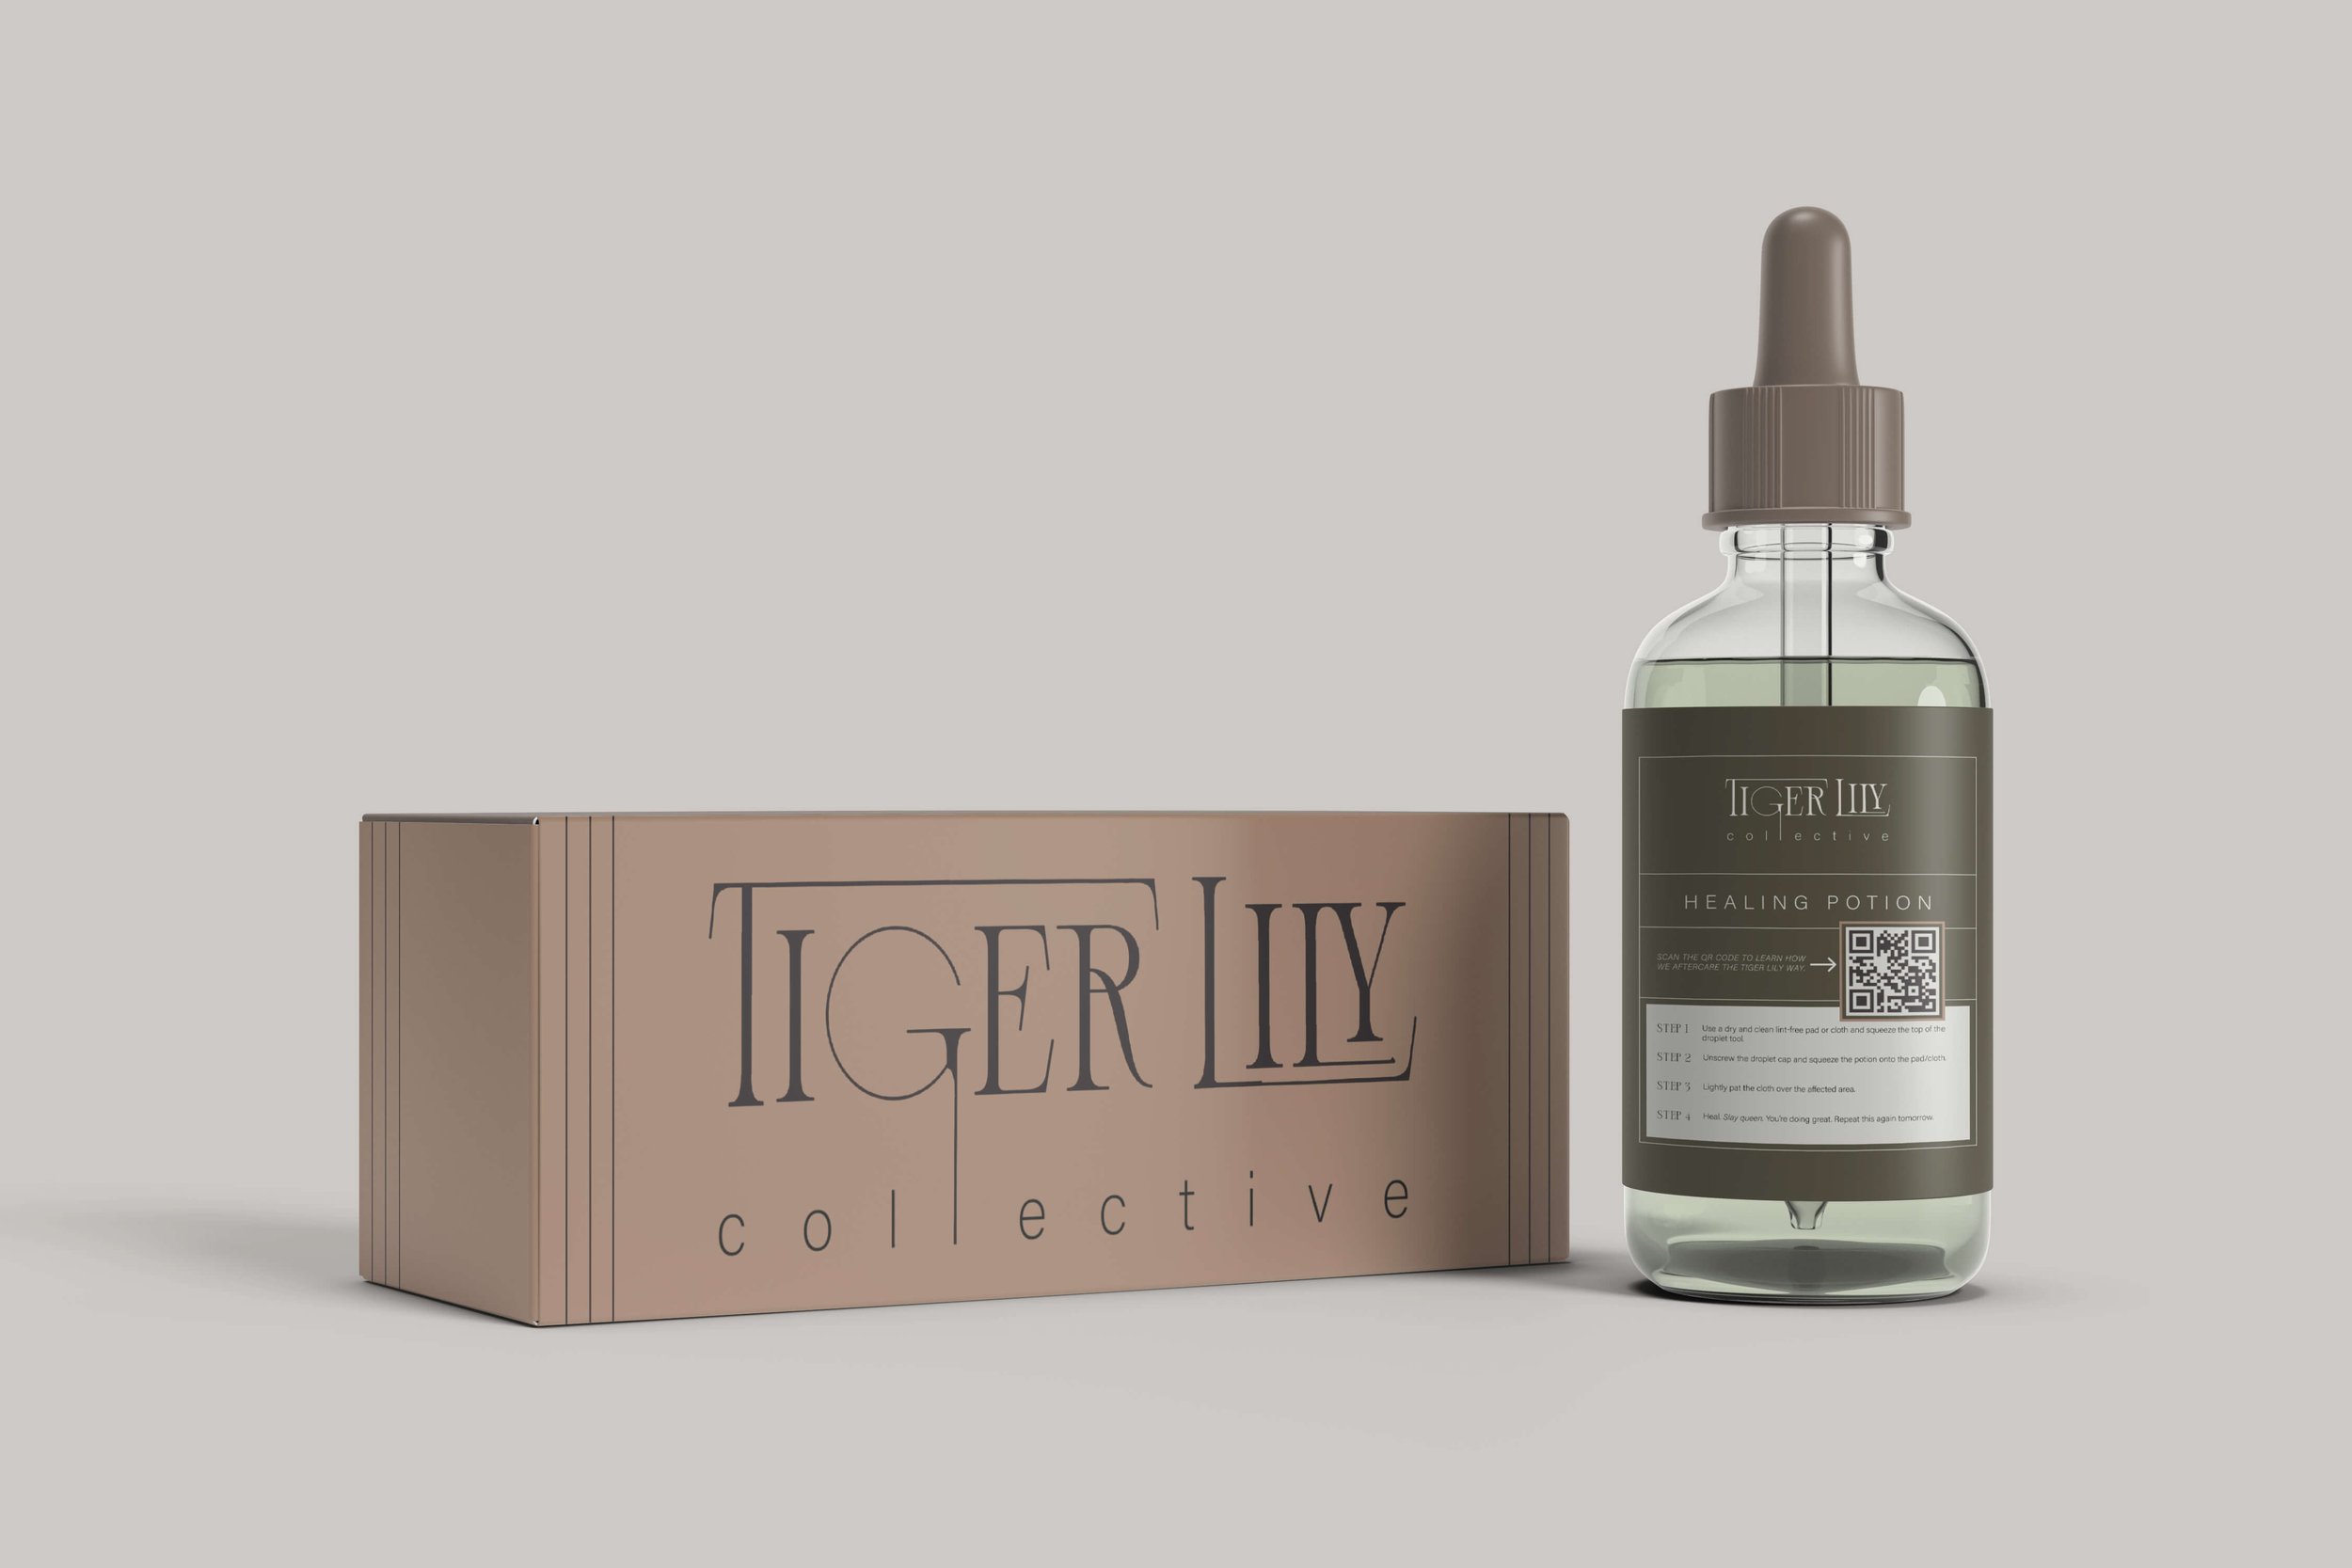 Tiger Lily Collective